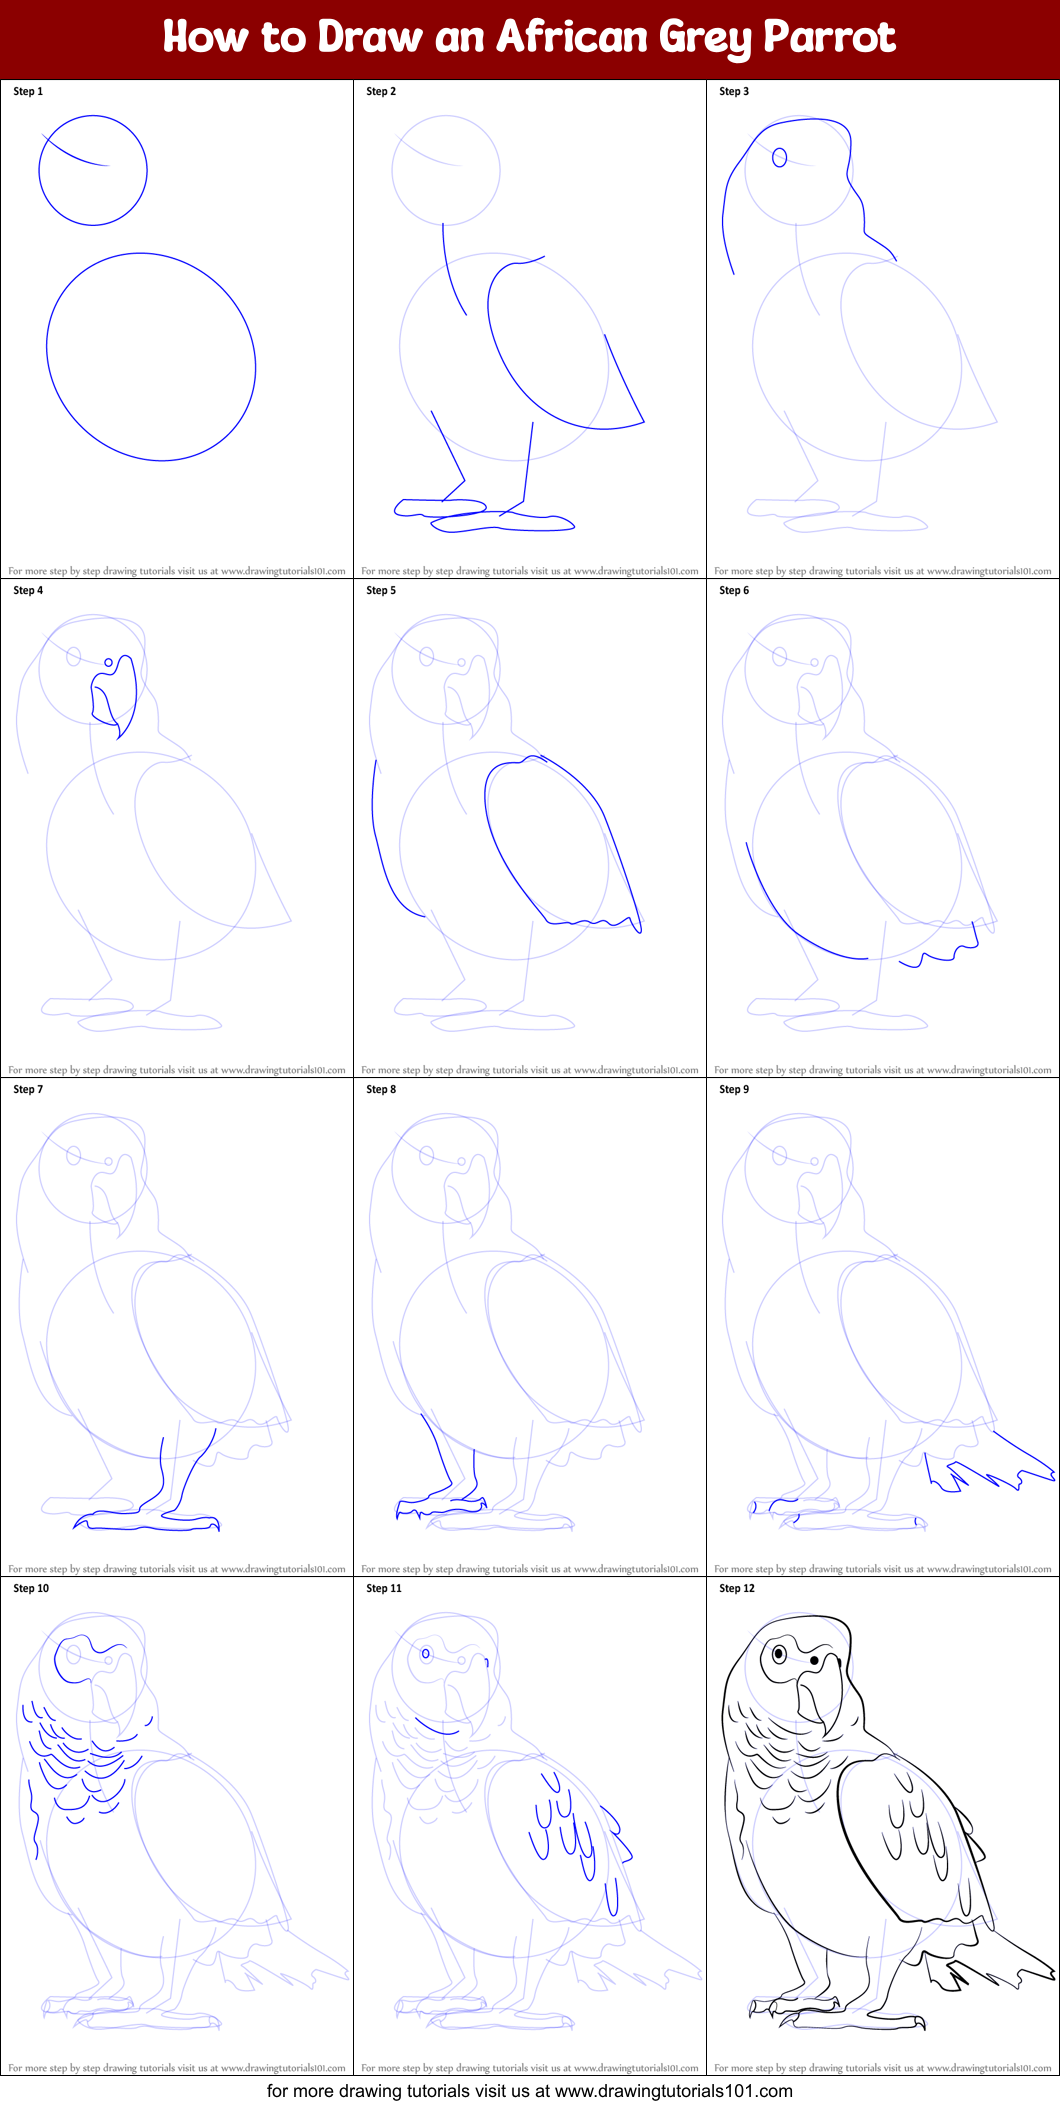 How to Draw an African Grey Parrot printable step by step drawing sheet